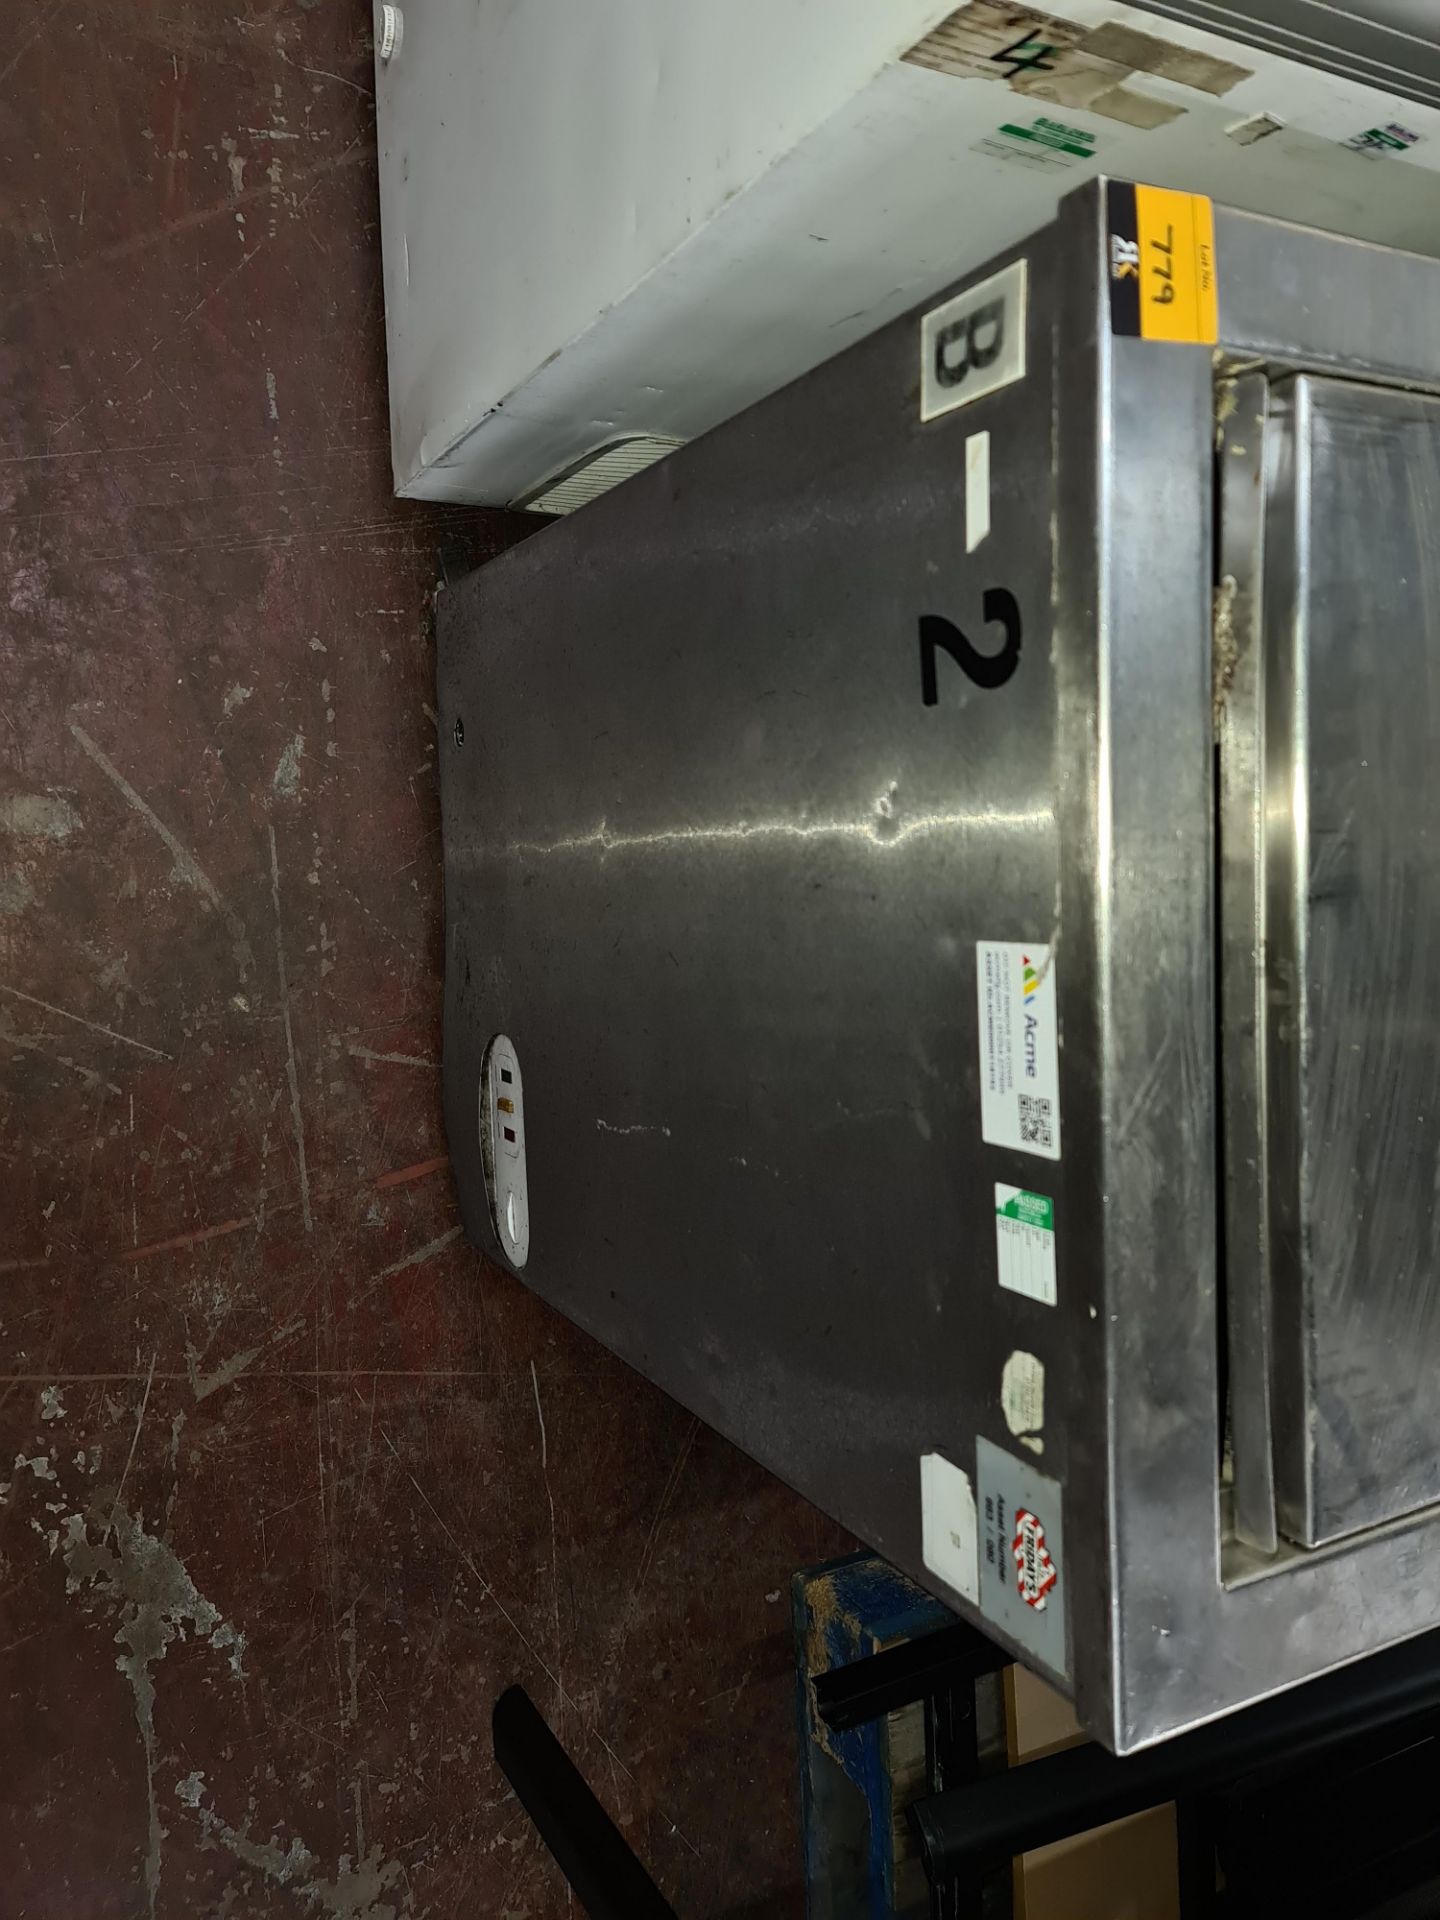 Stainless steel mobile sliding top freezer - Image 2 of 5